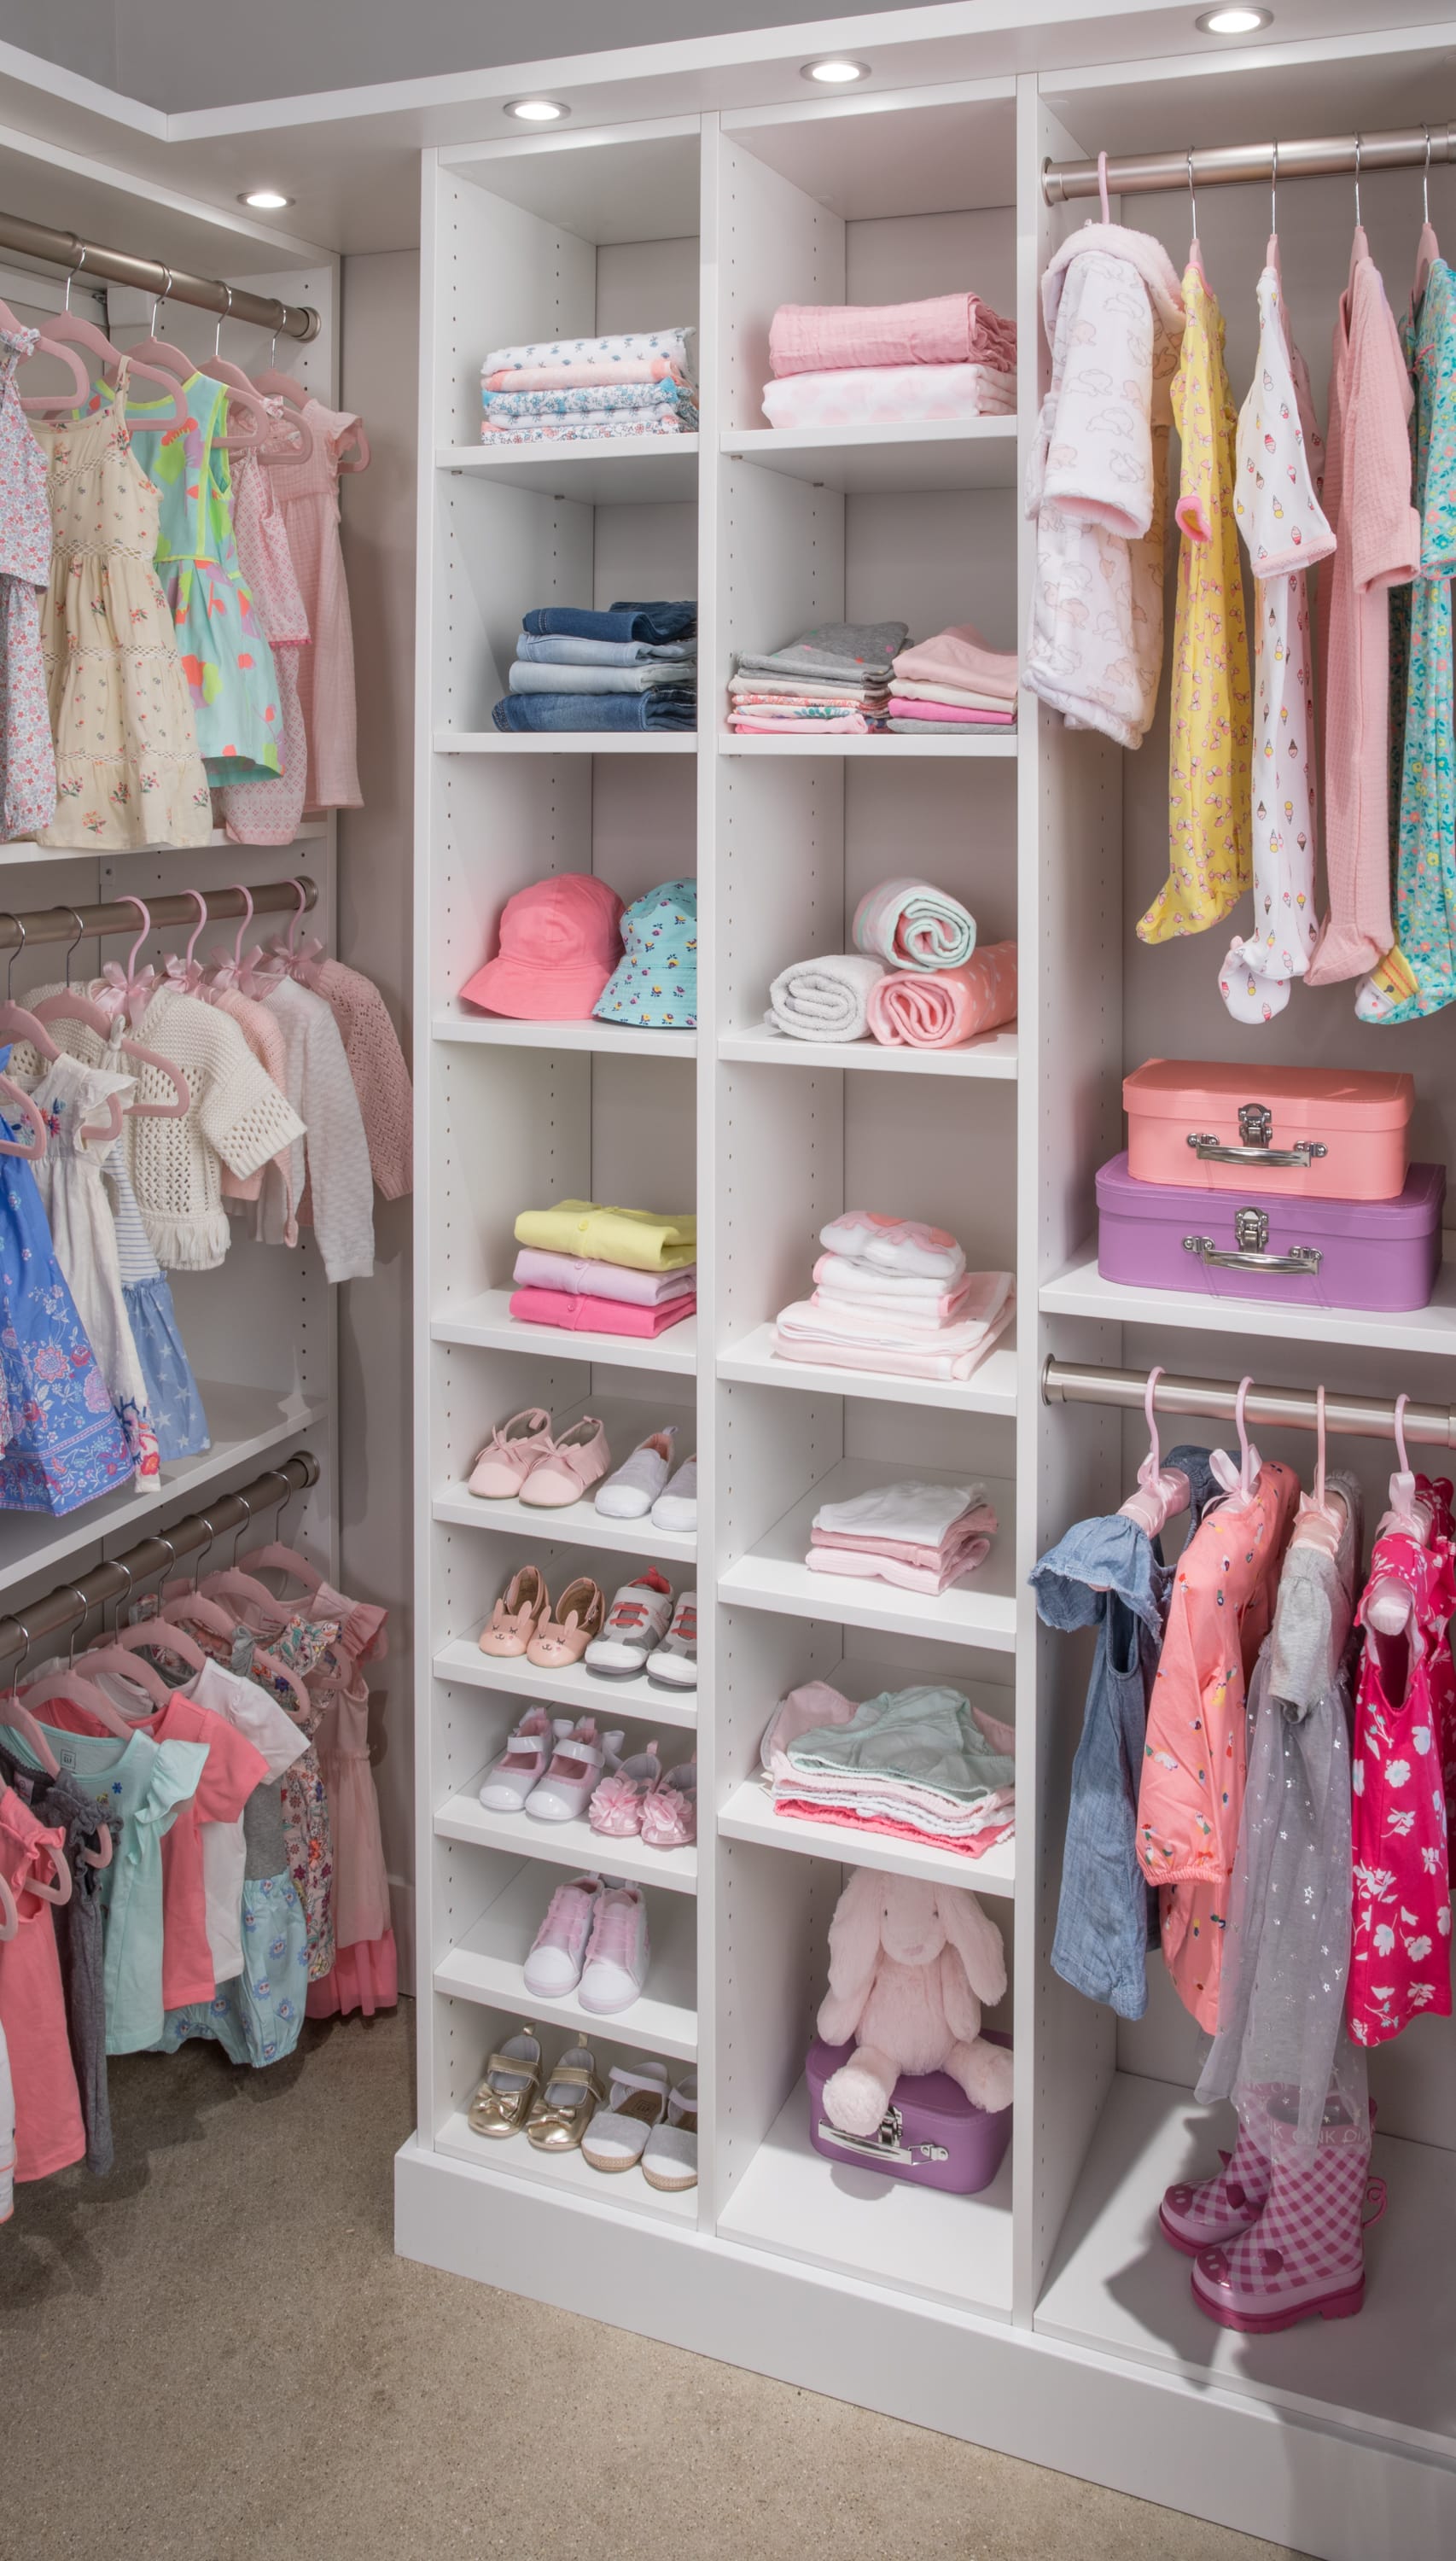 Girls walk in closet with clothing on racks and shelves